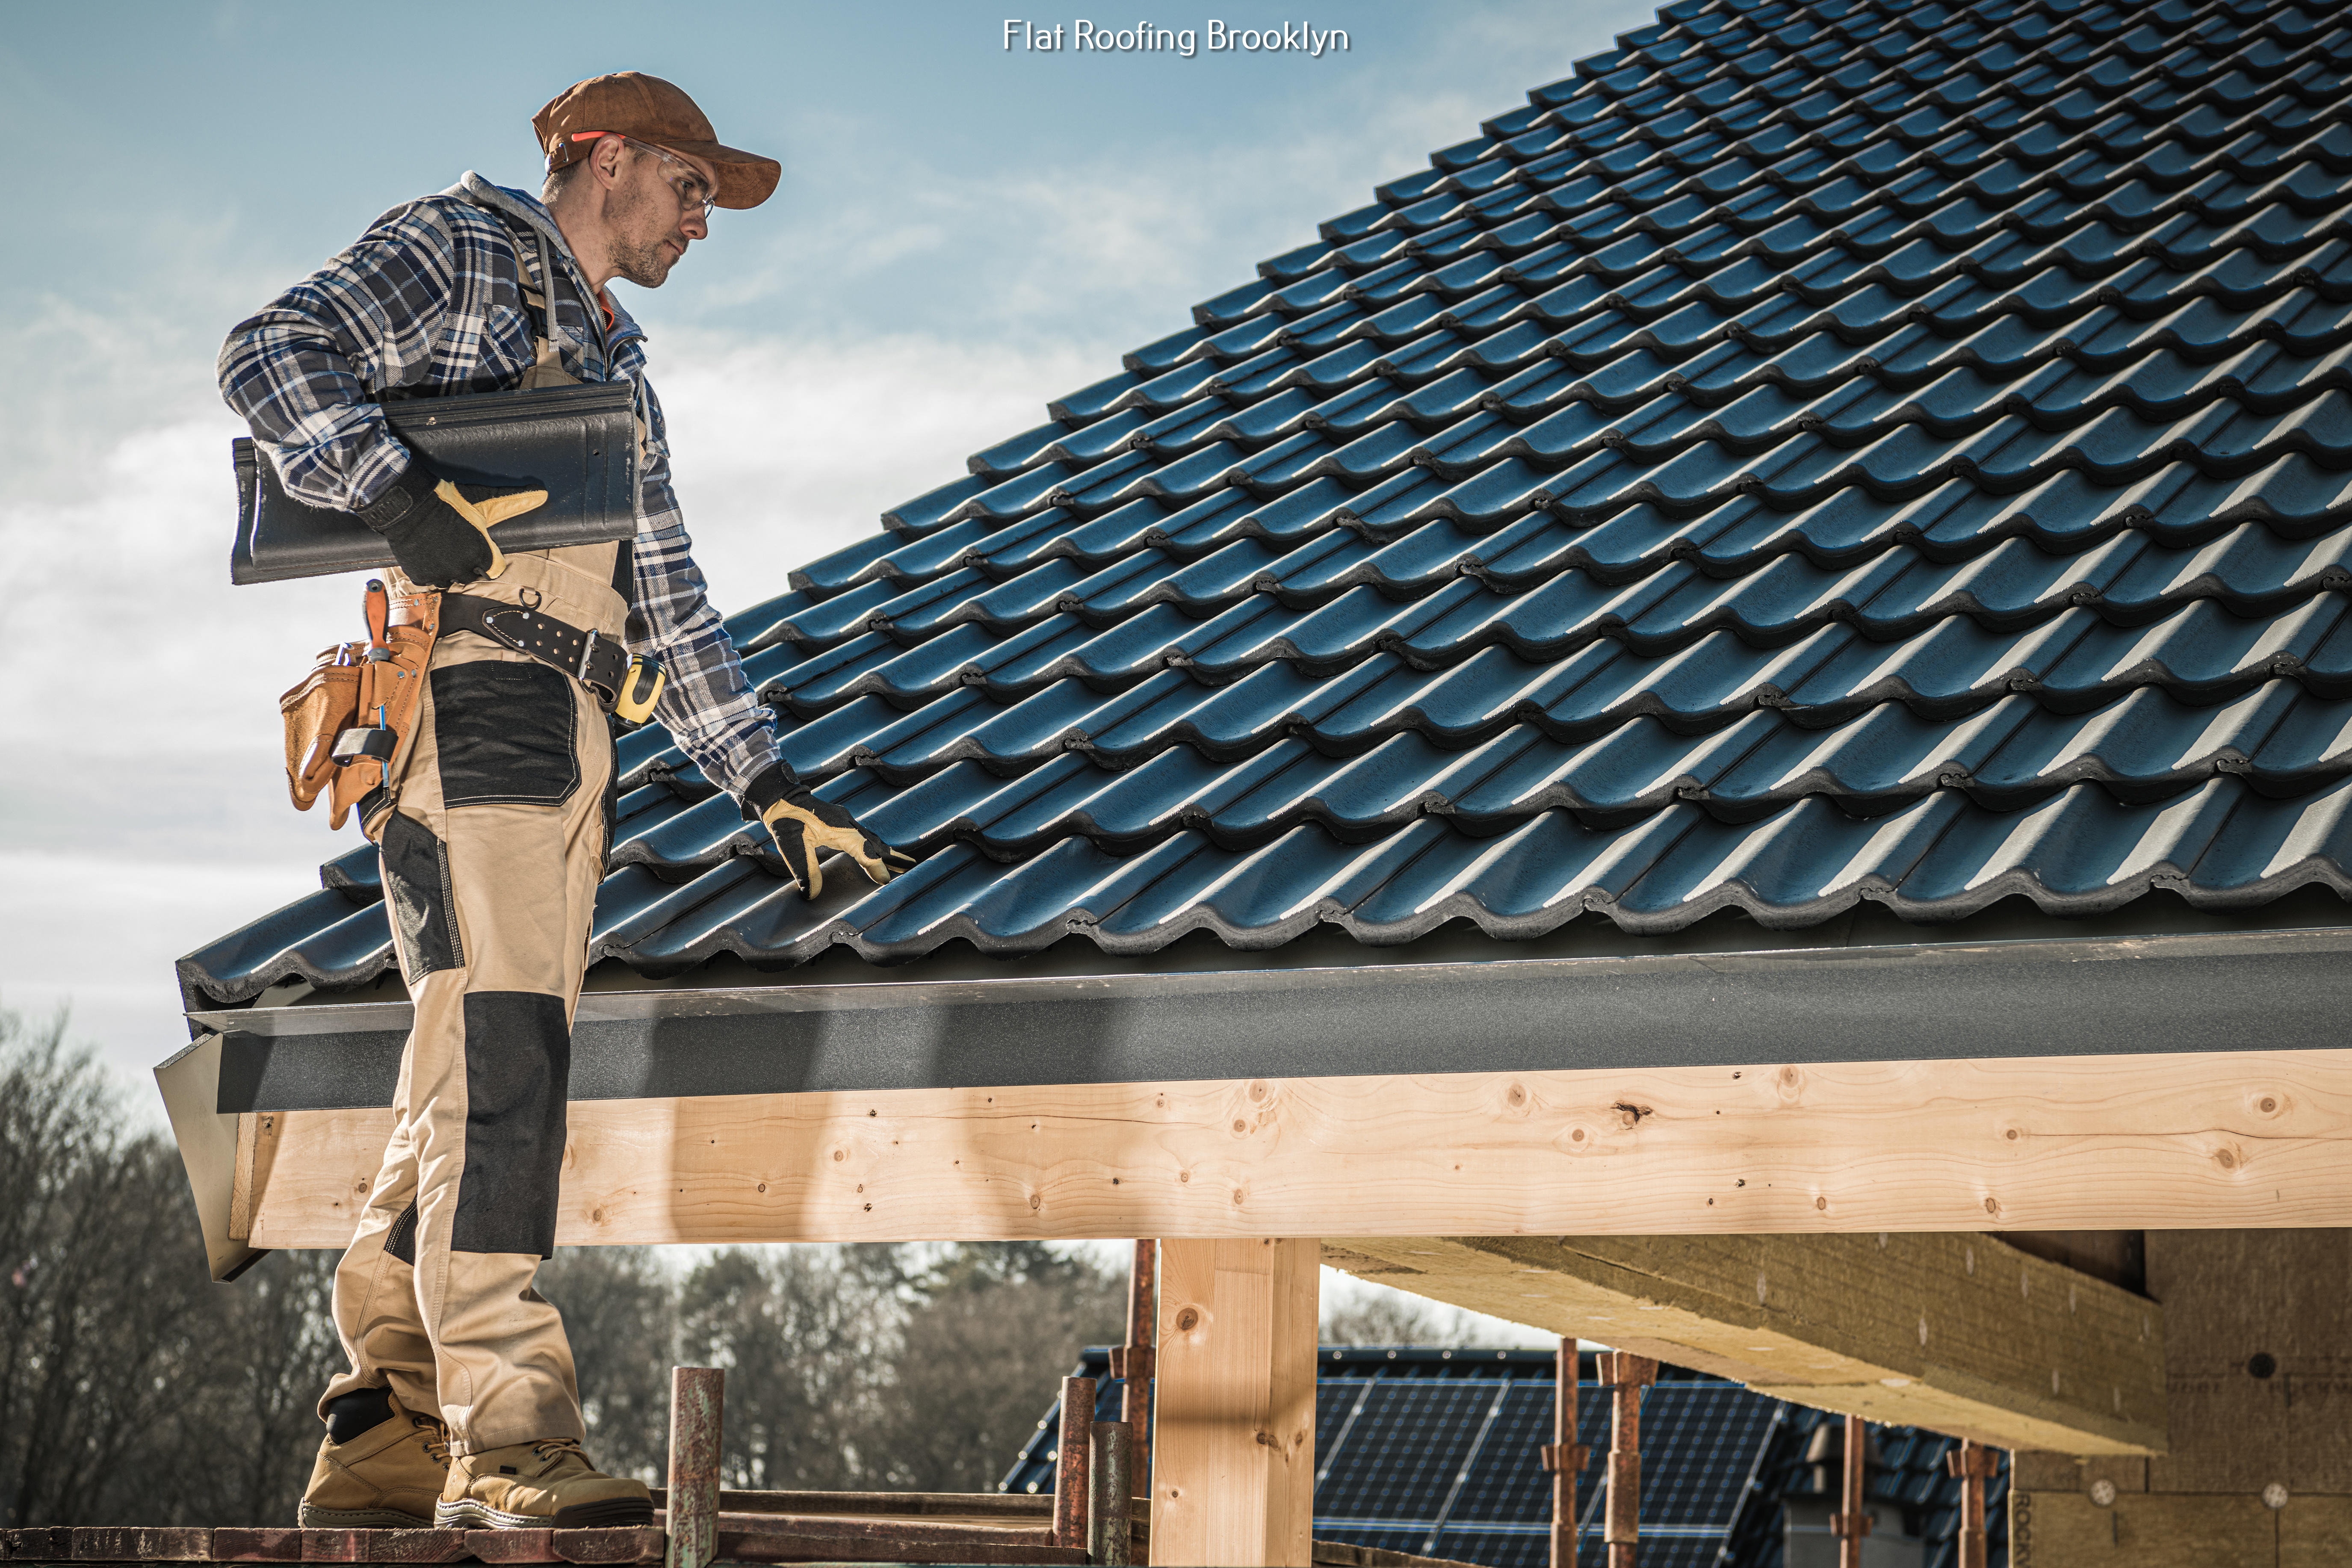 Skyward Roofing - Brooklyn Announces the Top Qualities of a Reputable Roofing Contractor 